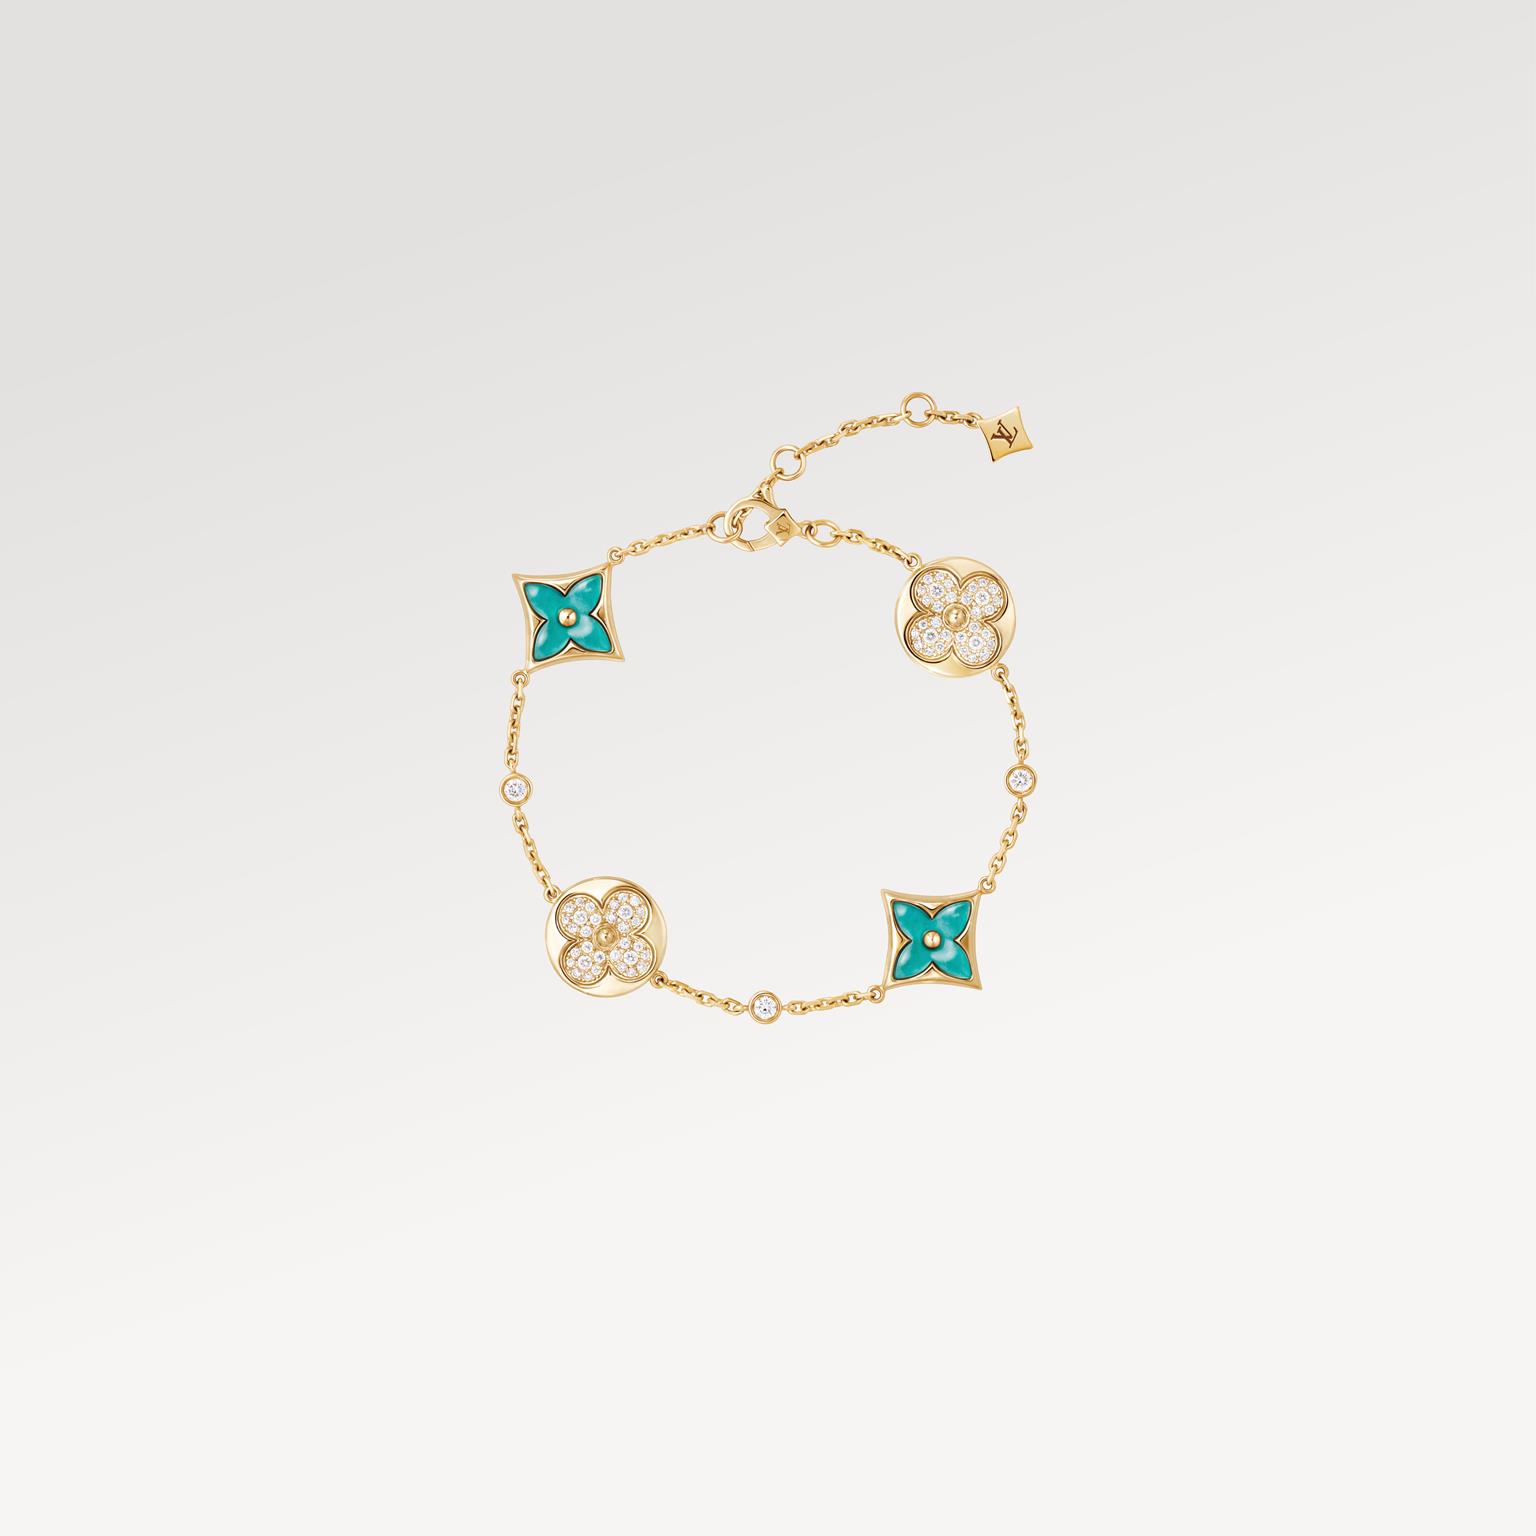 LOUIS VUITTON JEWELRY - COLOR BLOSSOM AMAZONITE 4 MOTIFS BRACELET IN YELLOW GOLD AND DIAMONDS